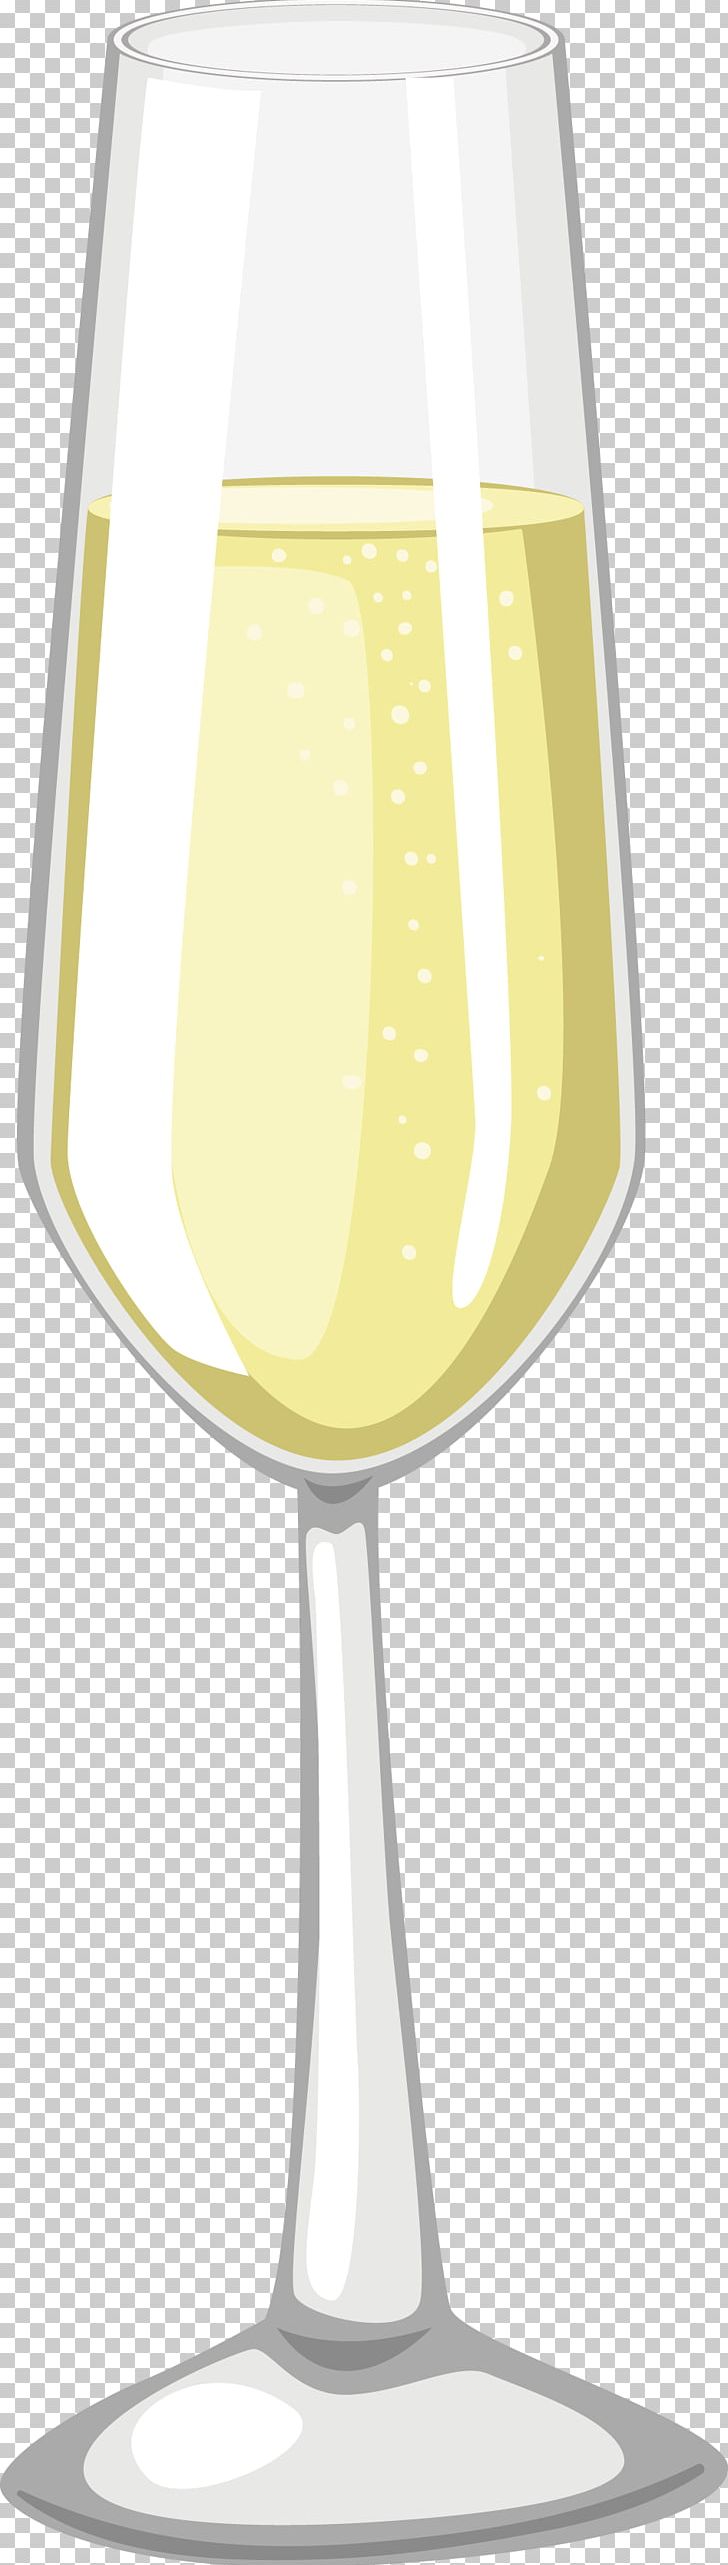 White Wine Champagne Wine Glass PNG, Clipart, Alcohol, Alcoholic Drink, Beer Glass, Bottle, Champag Free PNG Download